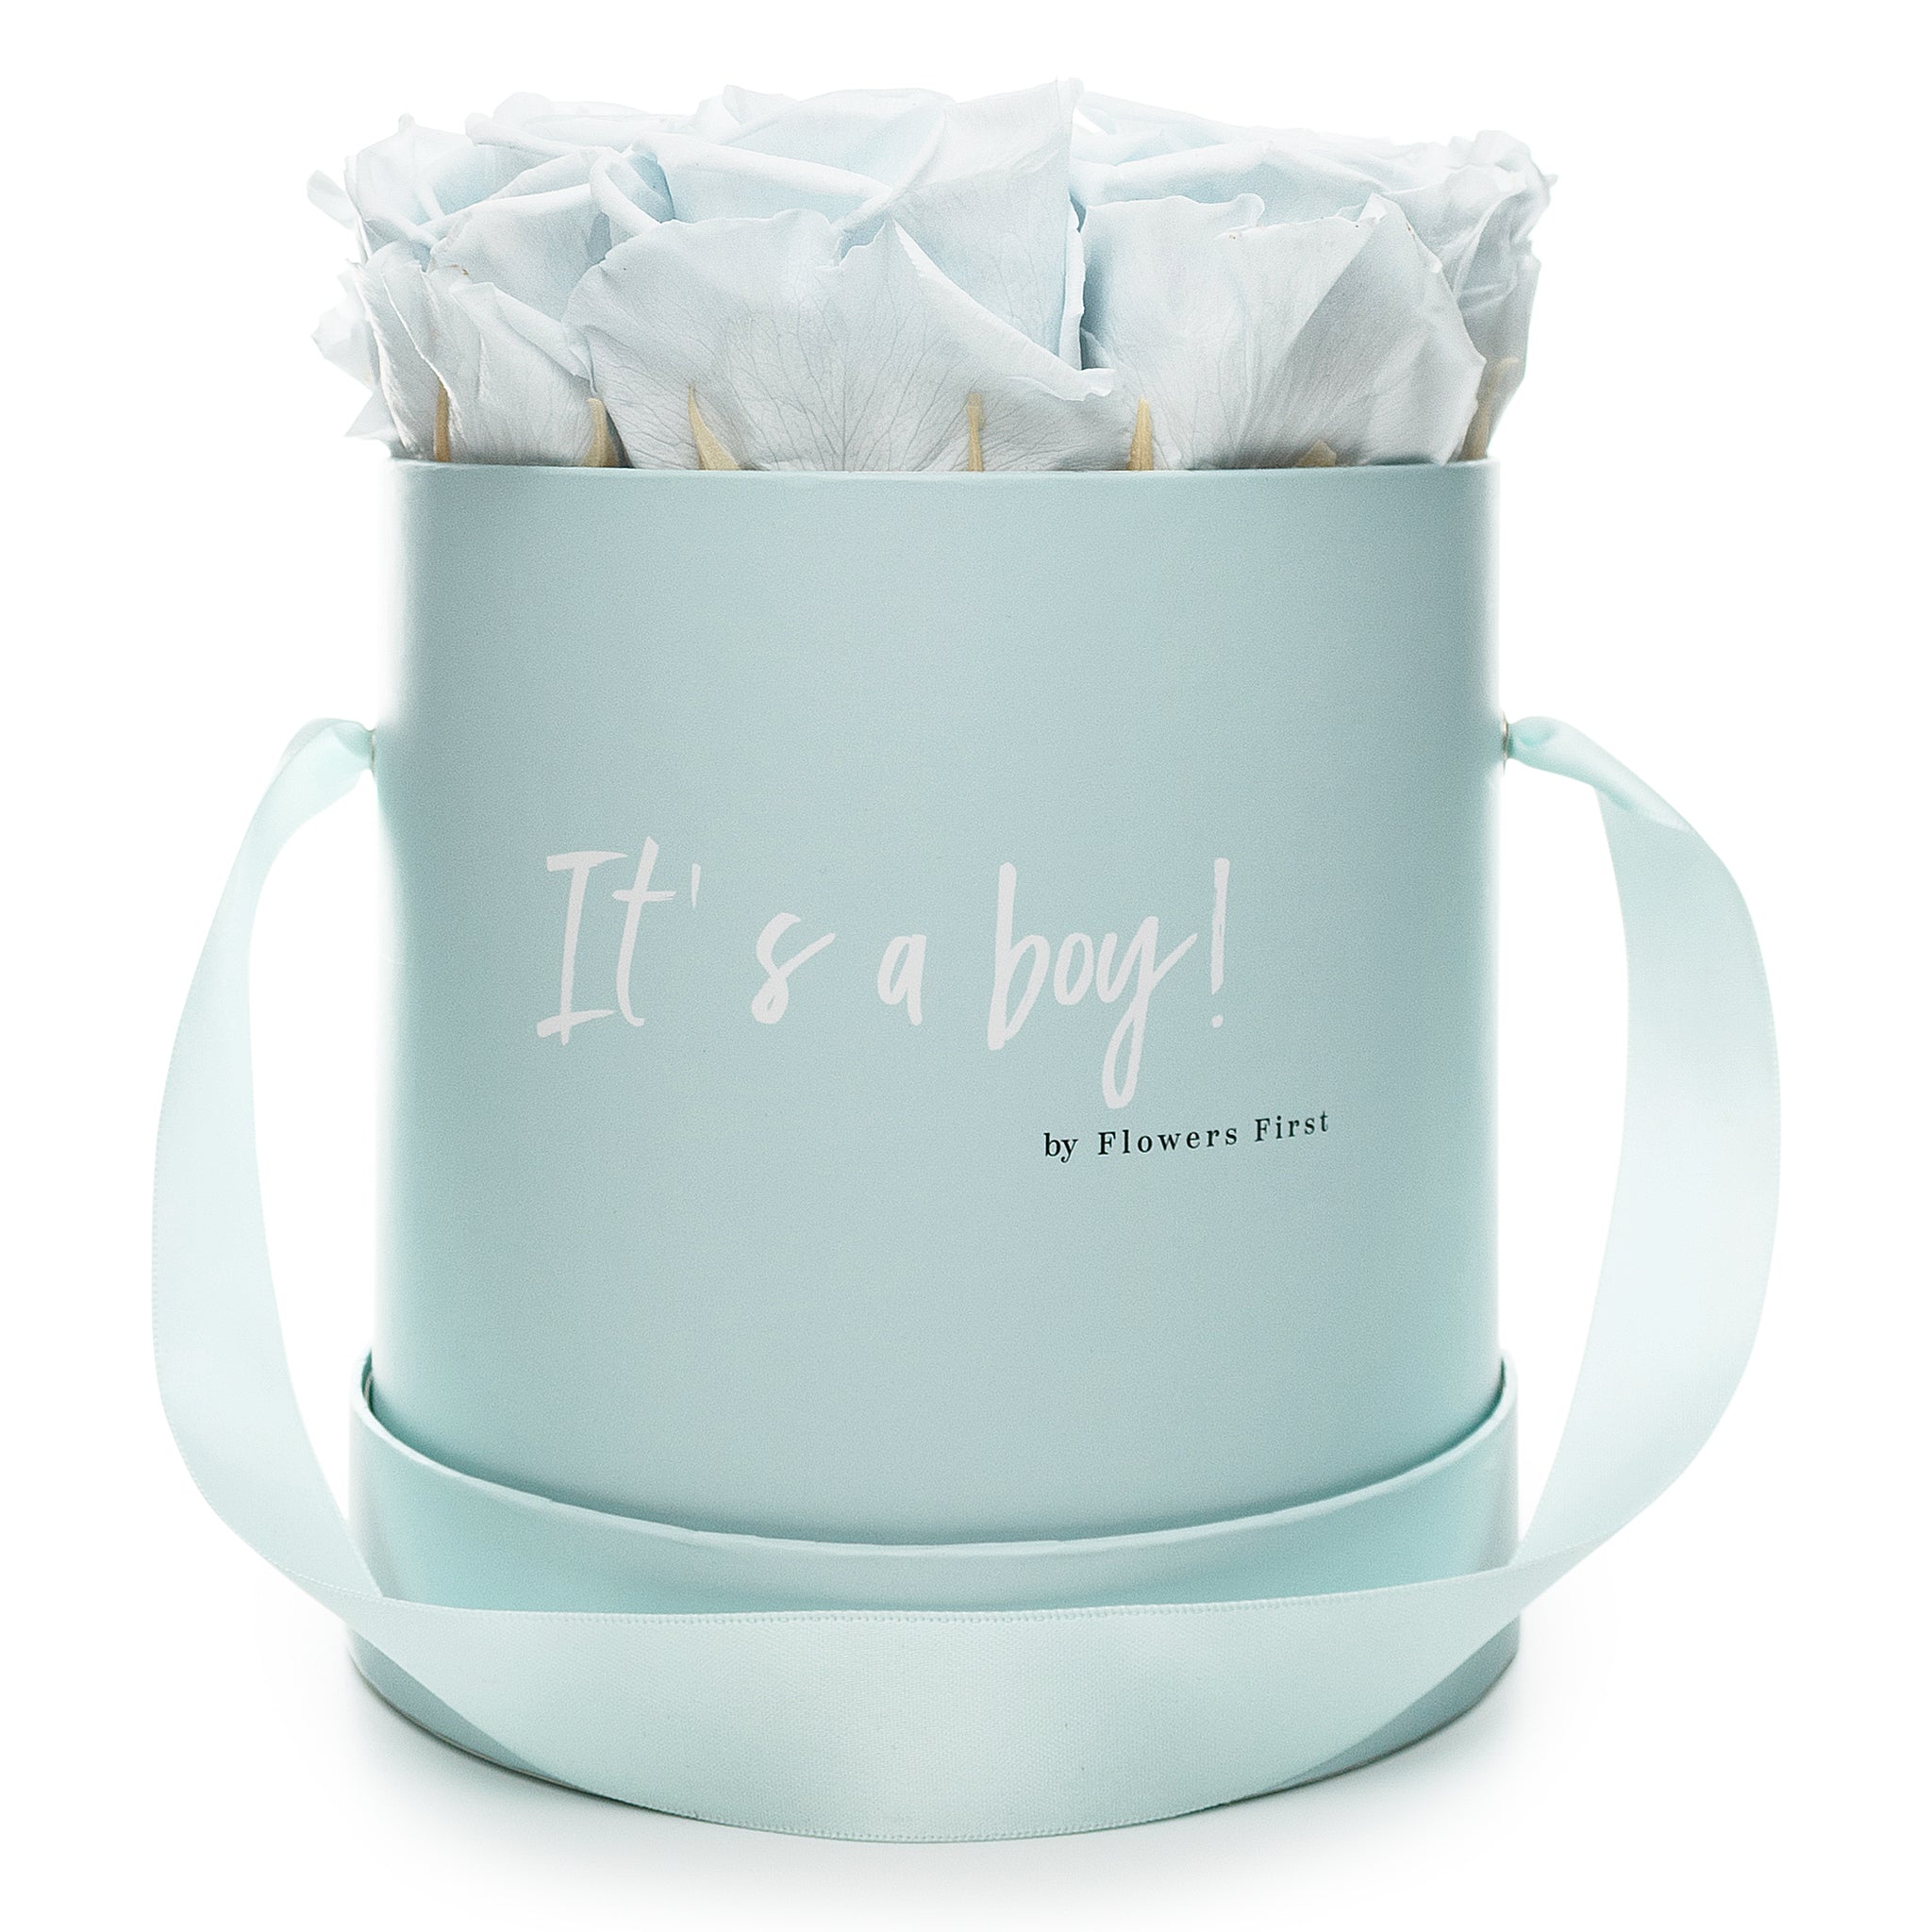 Forever Roses & M Round "It's a boy!" Hat Box